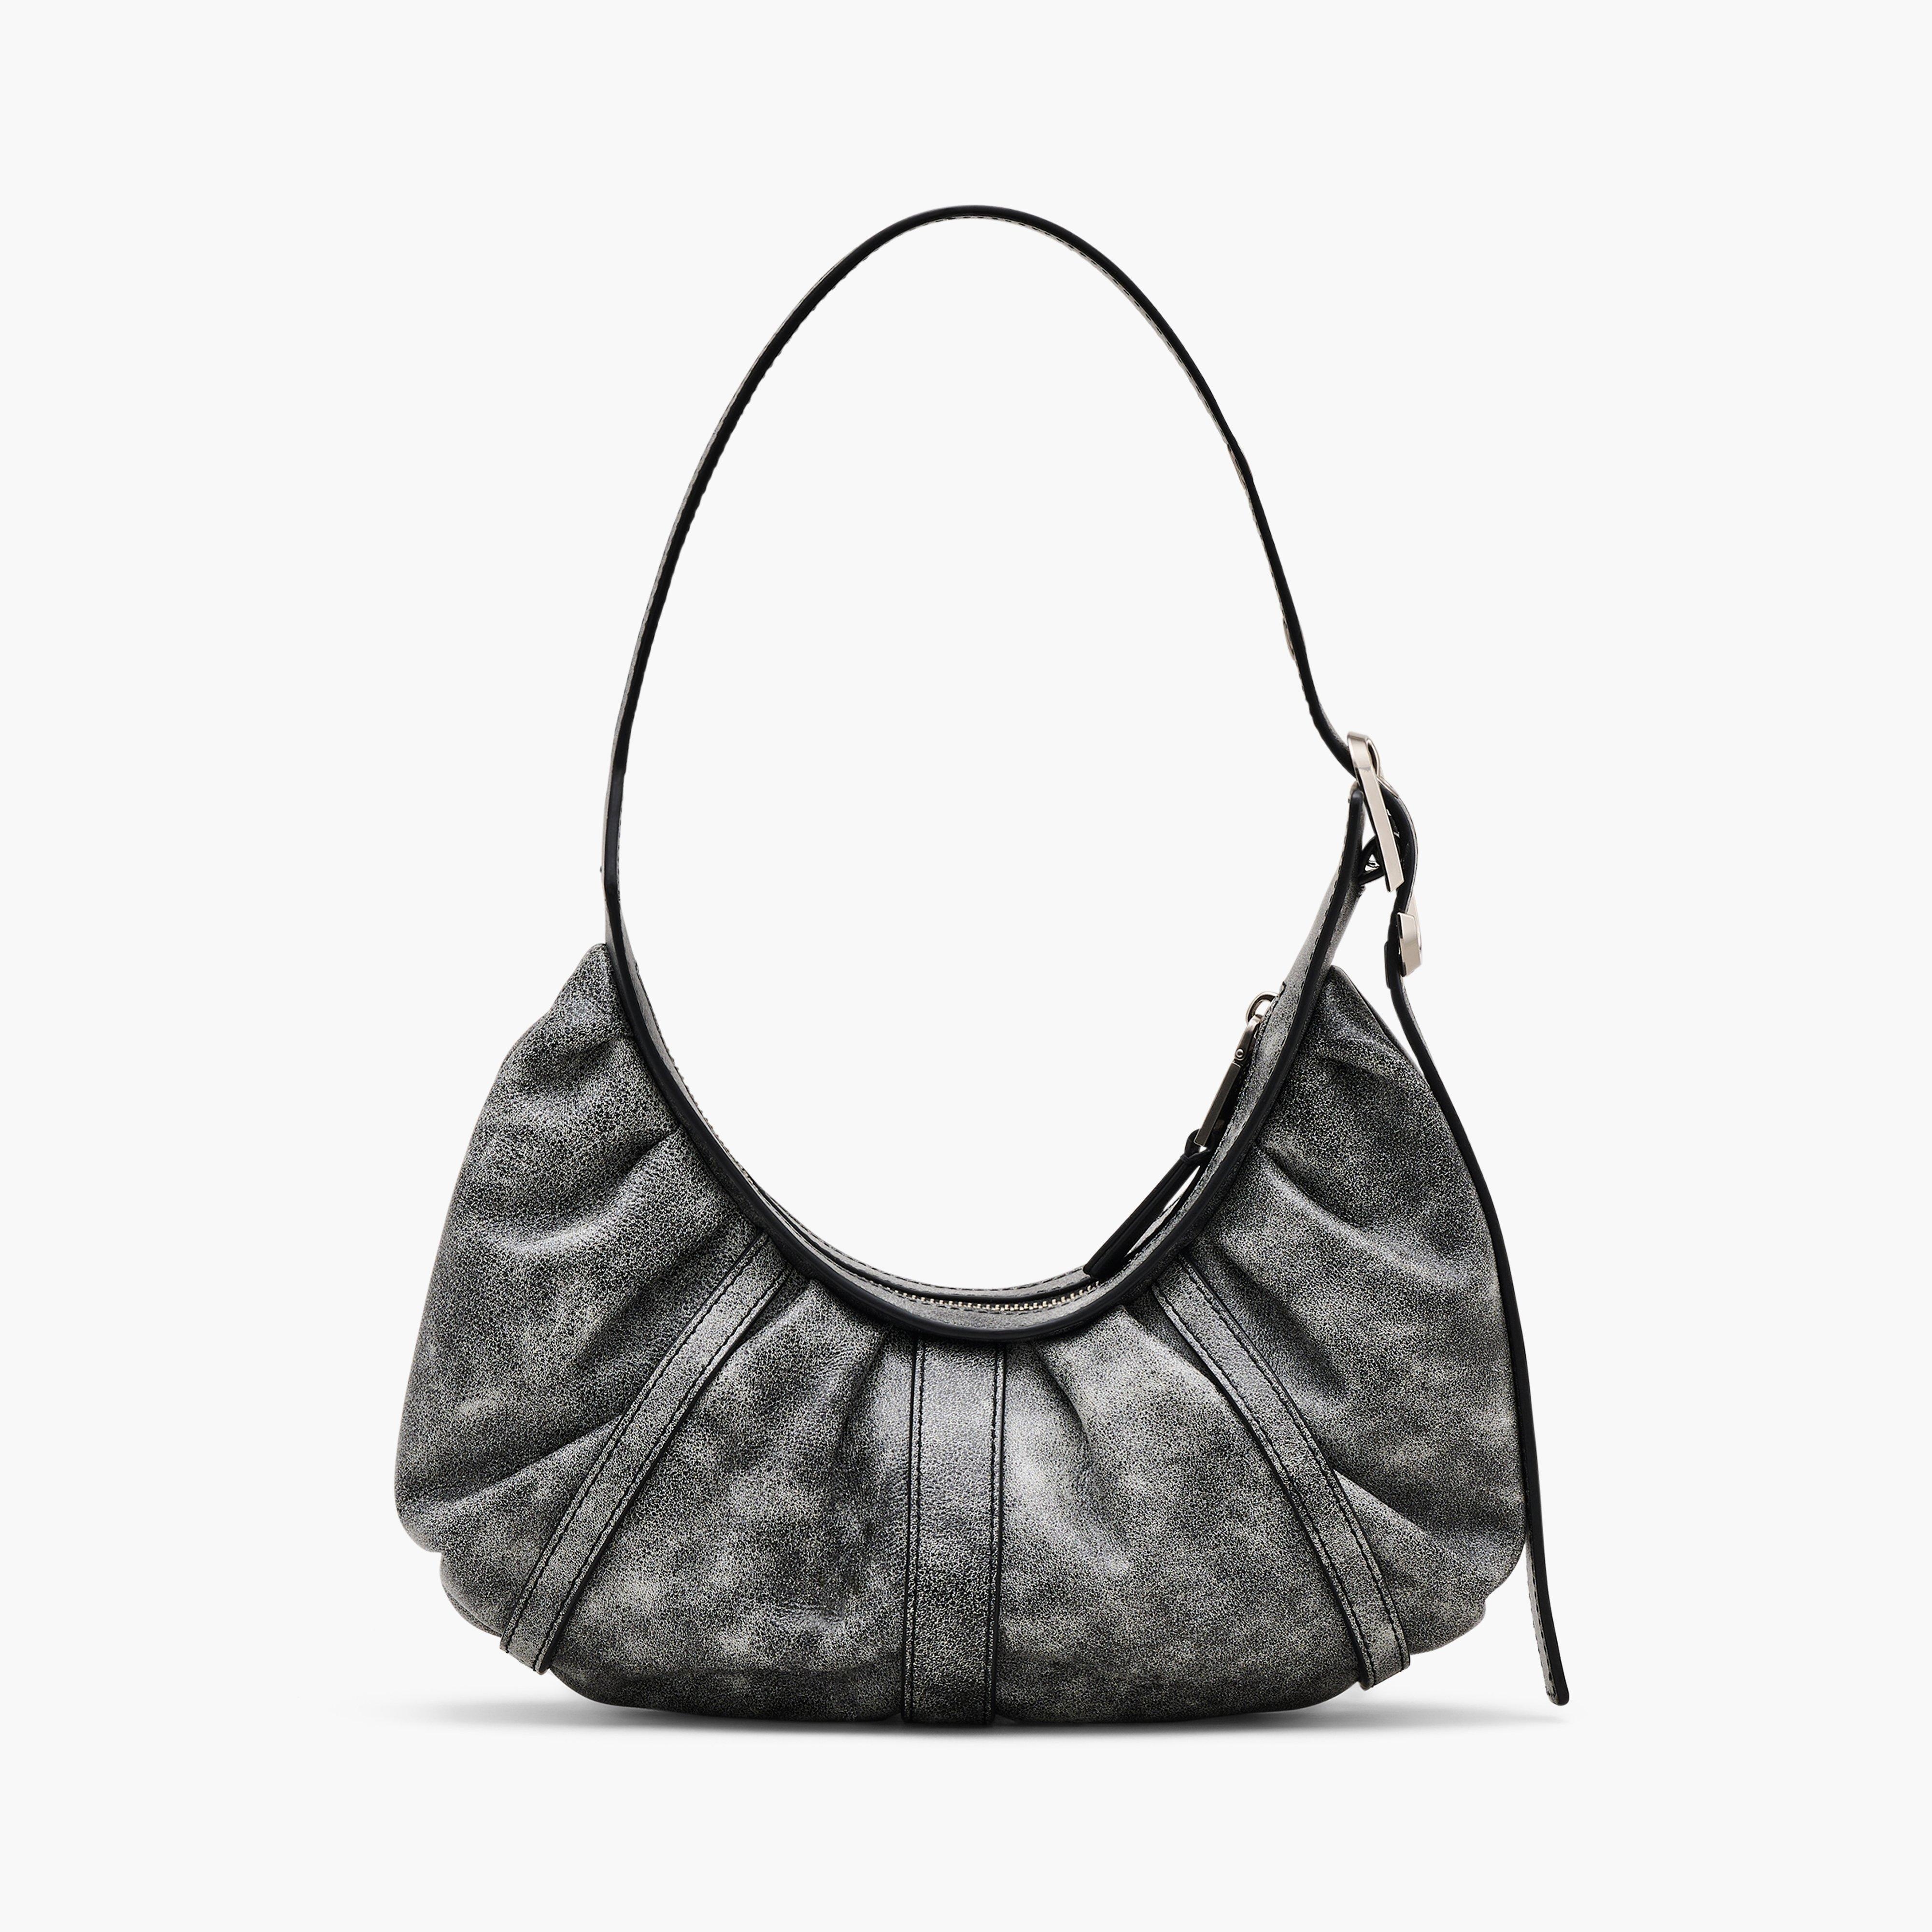 THE DISTRESSED LEATHER BUCKLE J MARC CRESCENT BAG - 3